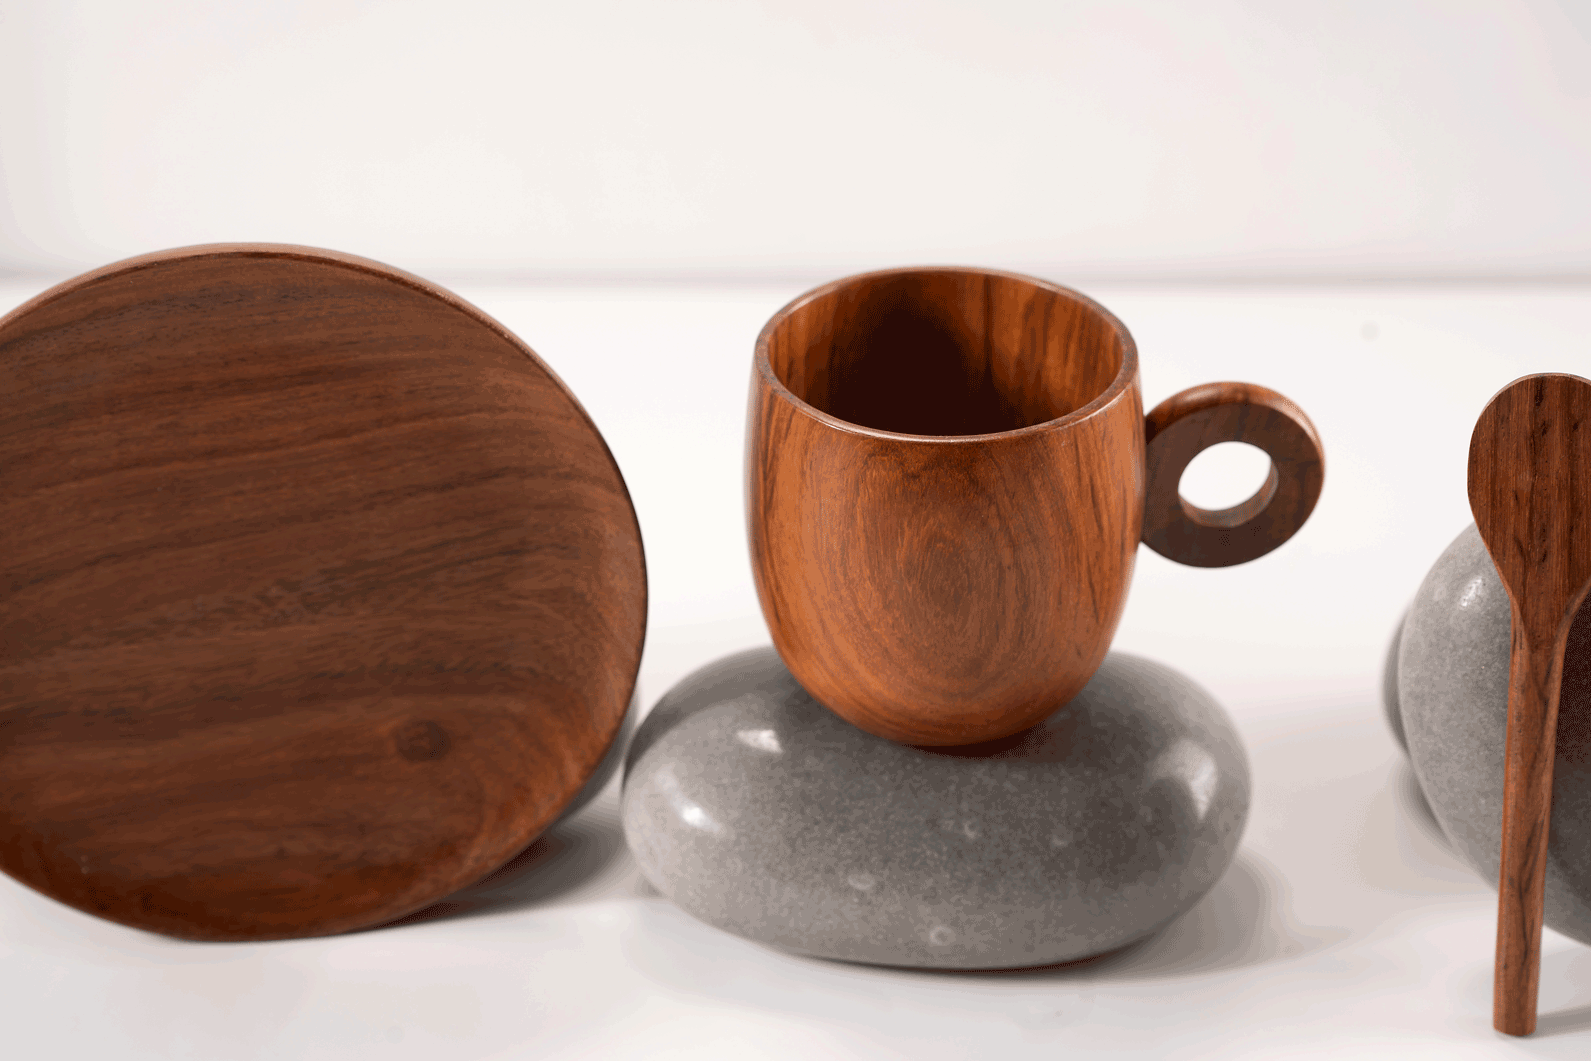 Thumbnail preview #12 for Shikora - Wooden cup saucer and spoon set